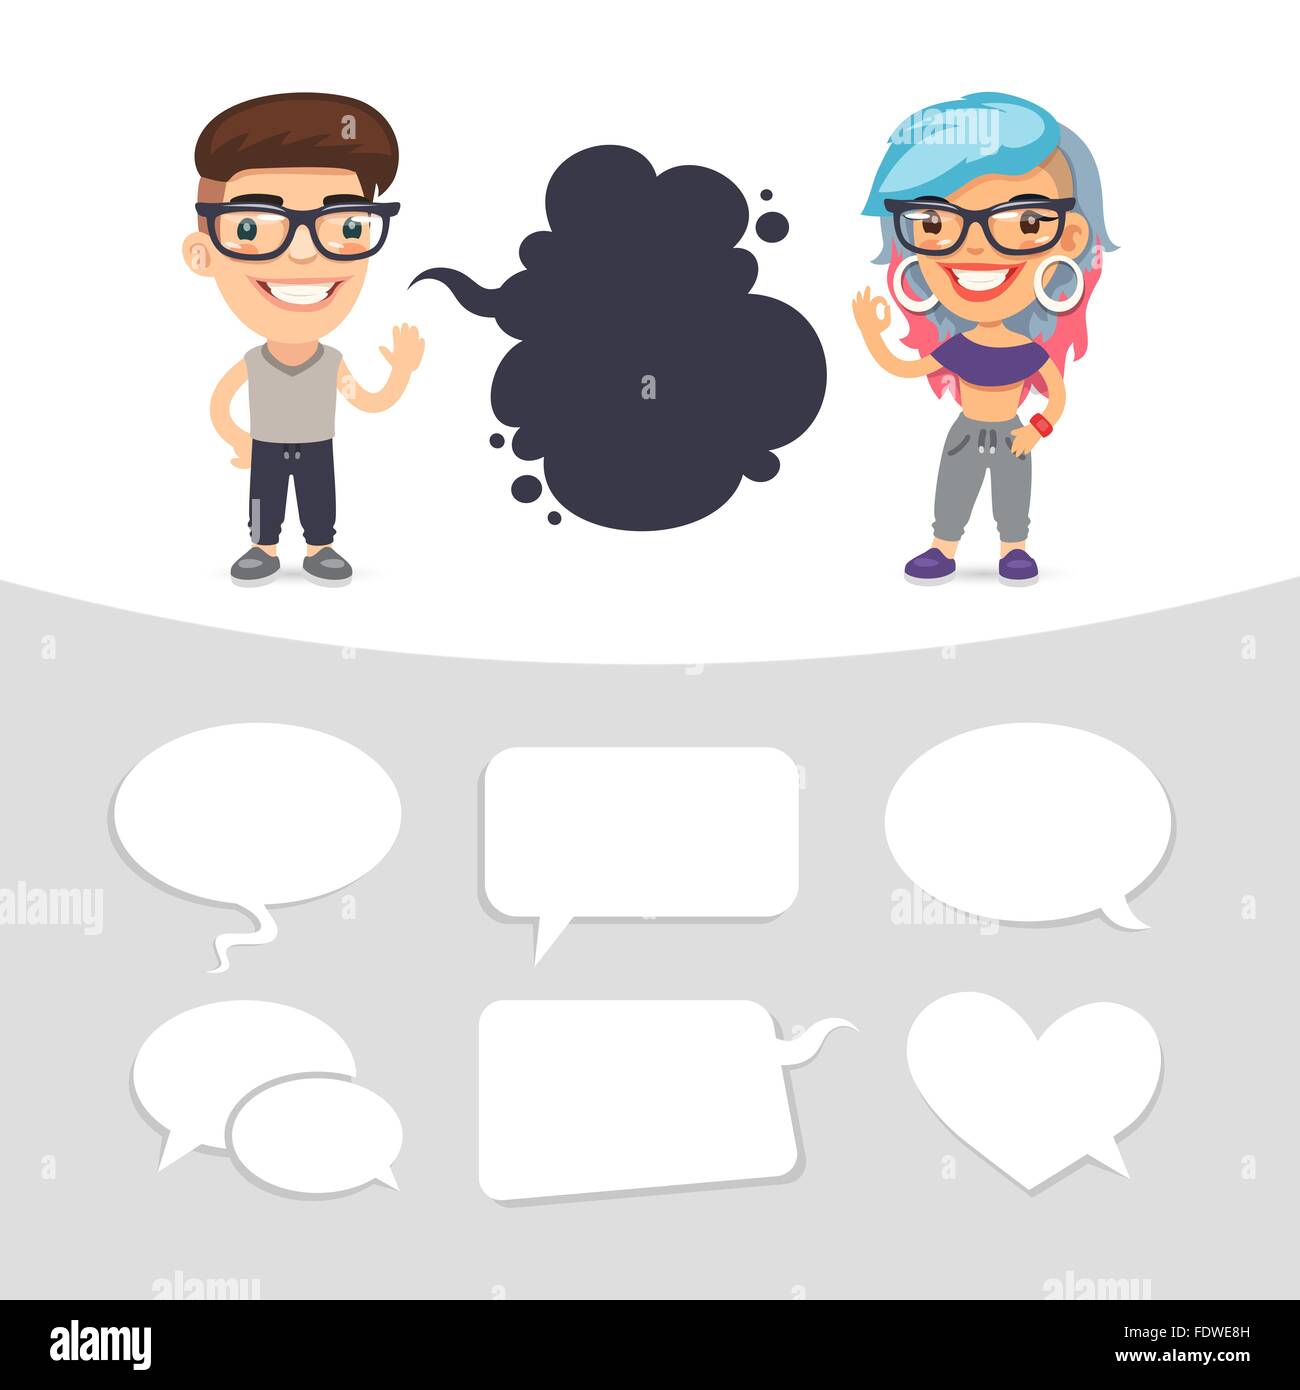 Casually Dressed Characters with a Speech Bubbles Stock Vector